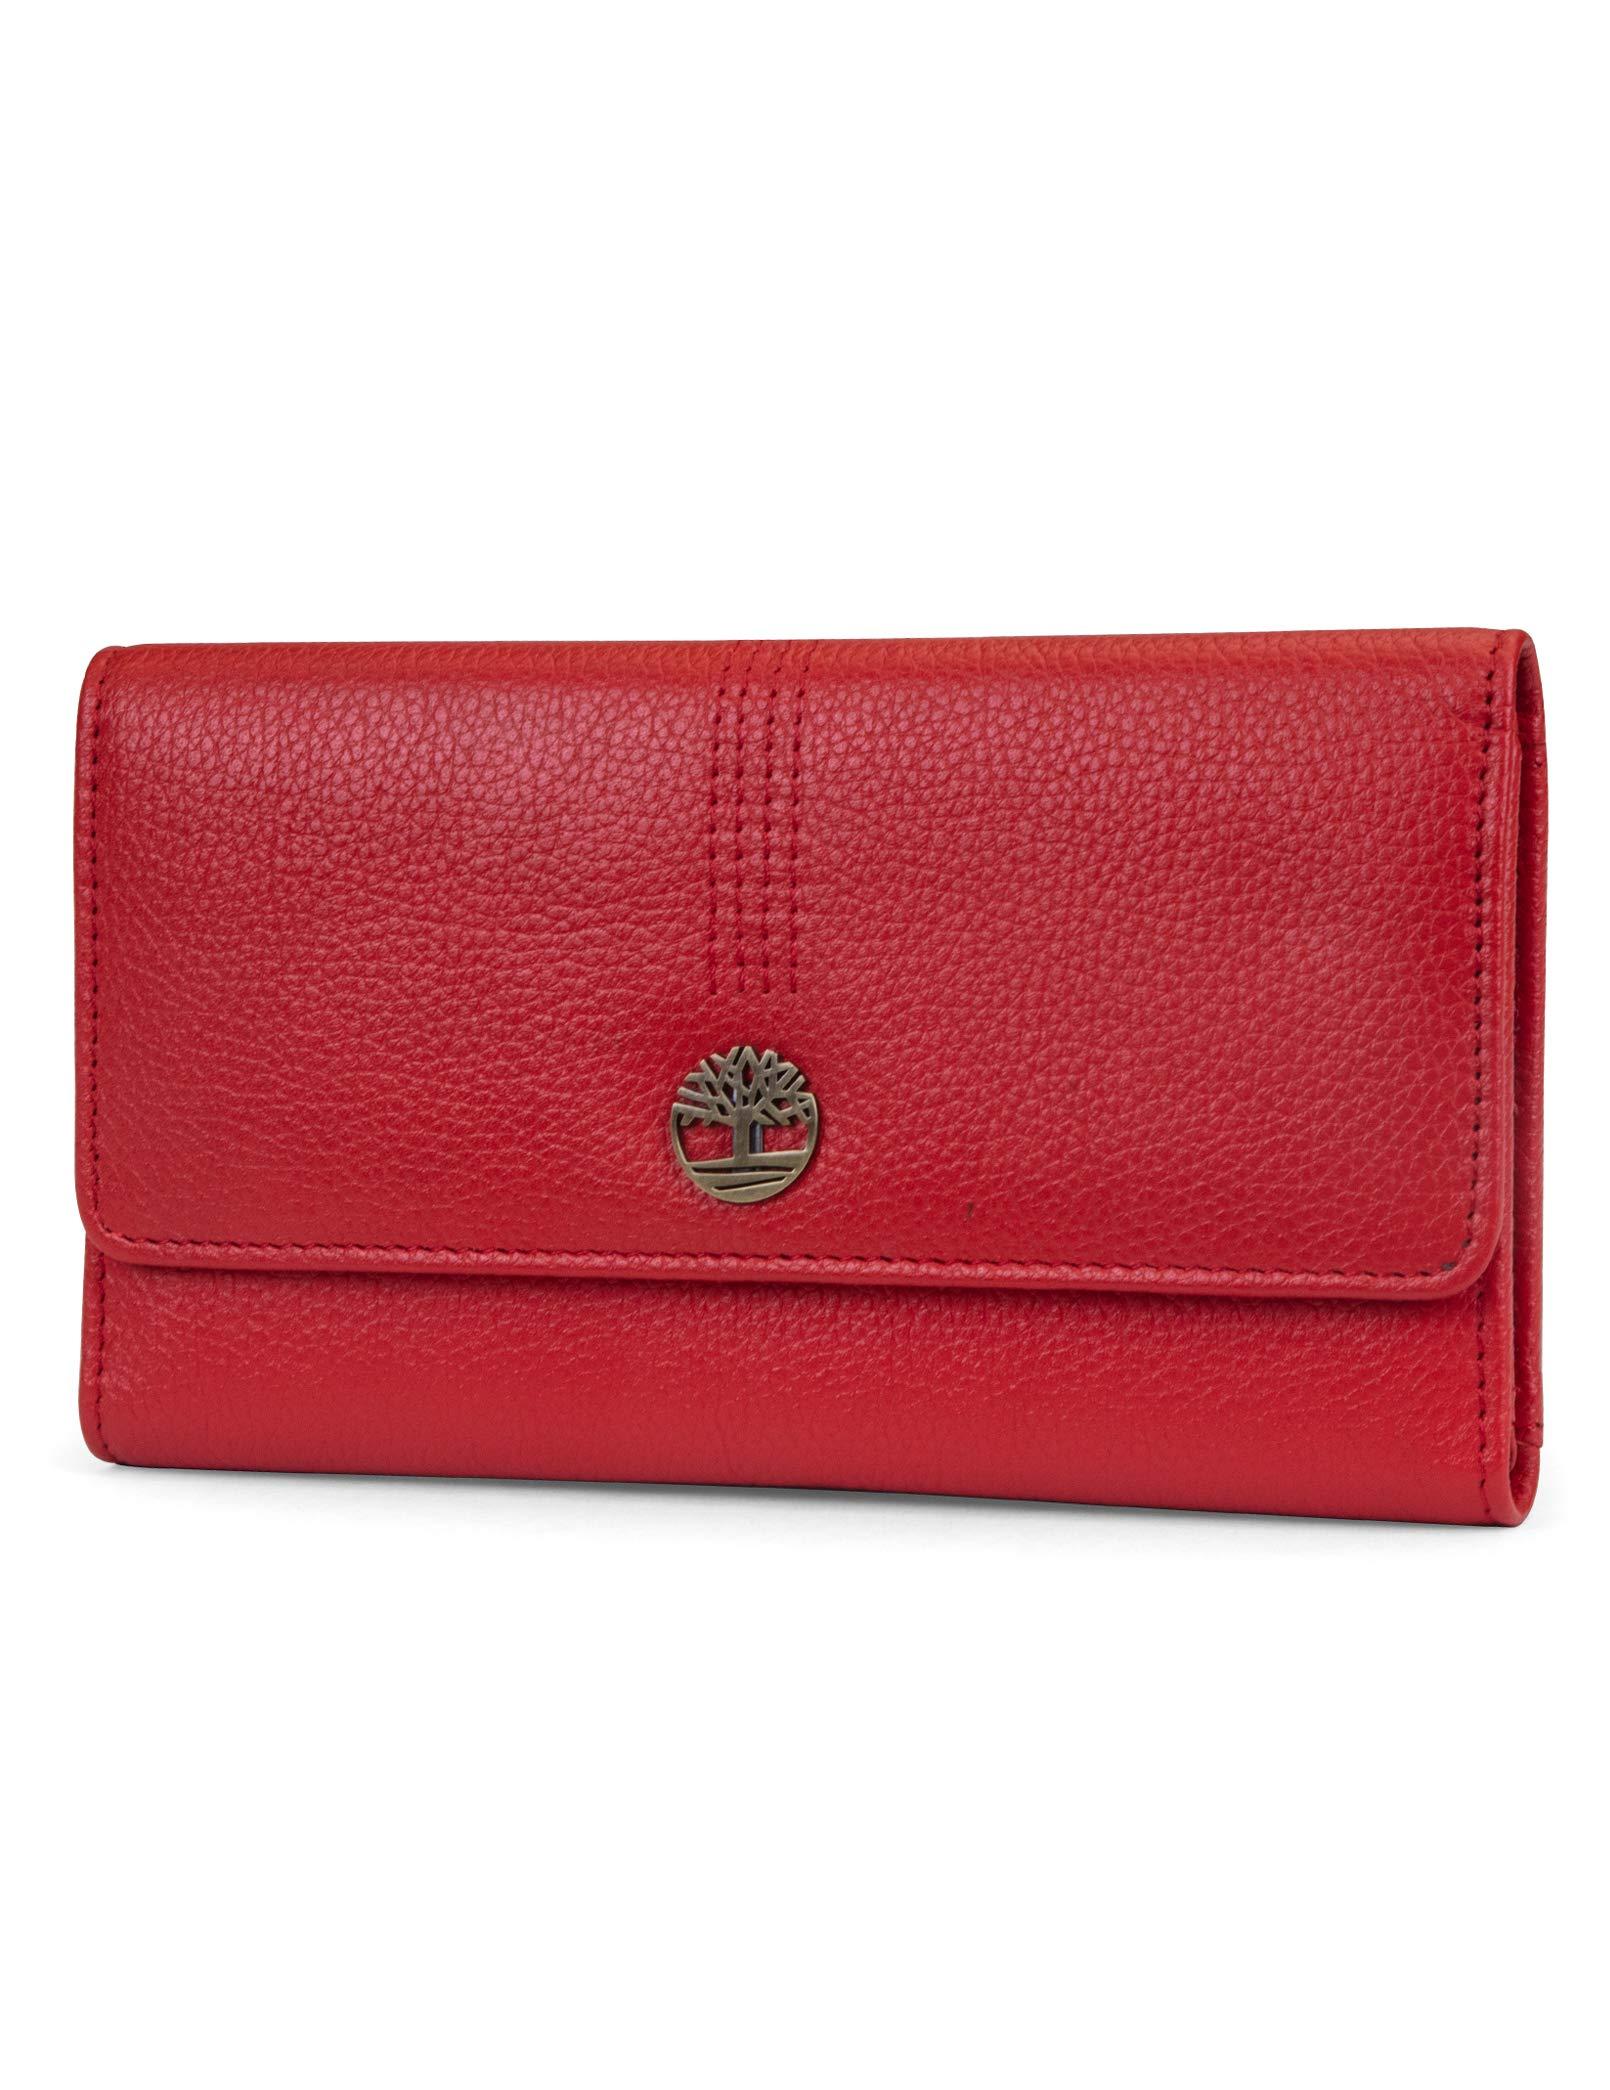 Timberland Womens Leather Rfid Flap Cluth Organizer Wallet in Red | Lyst